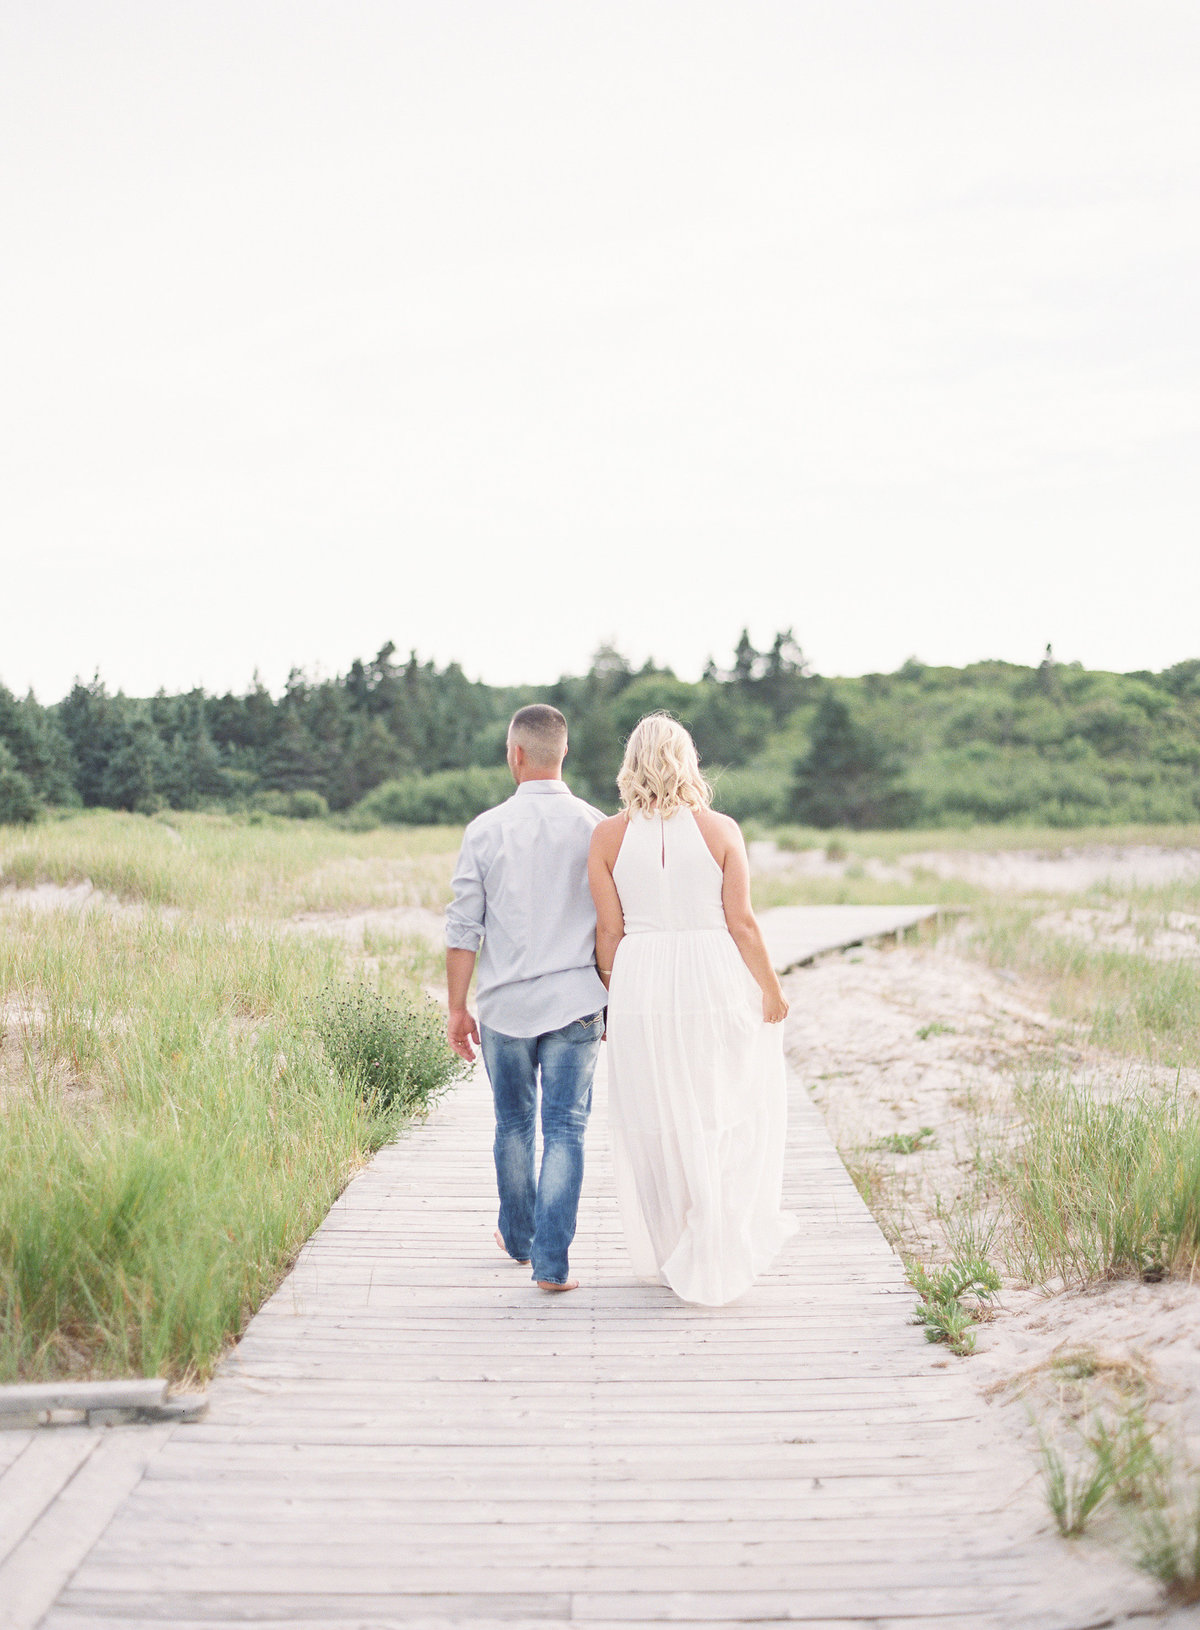 Jacqueline Anne Photography  - Hailey and Shea - Crystal Crescent Beach Engagement-7